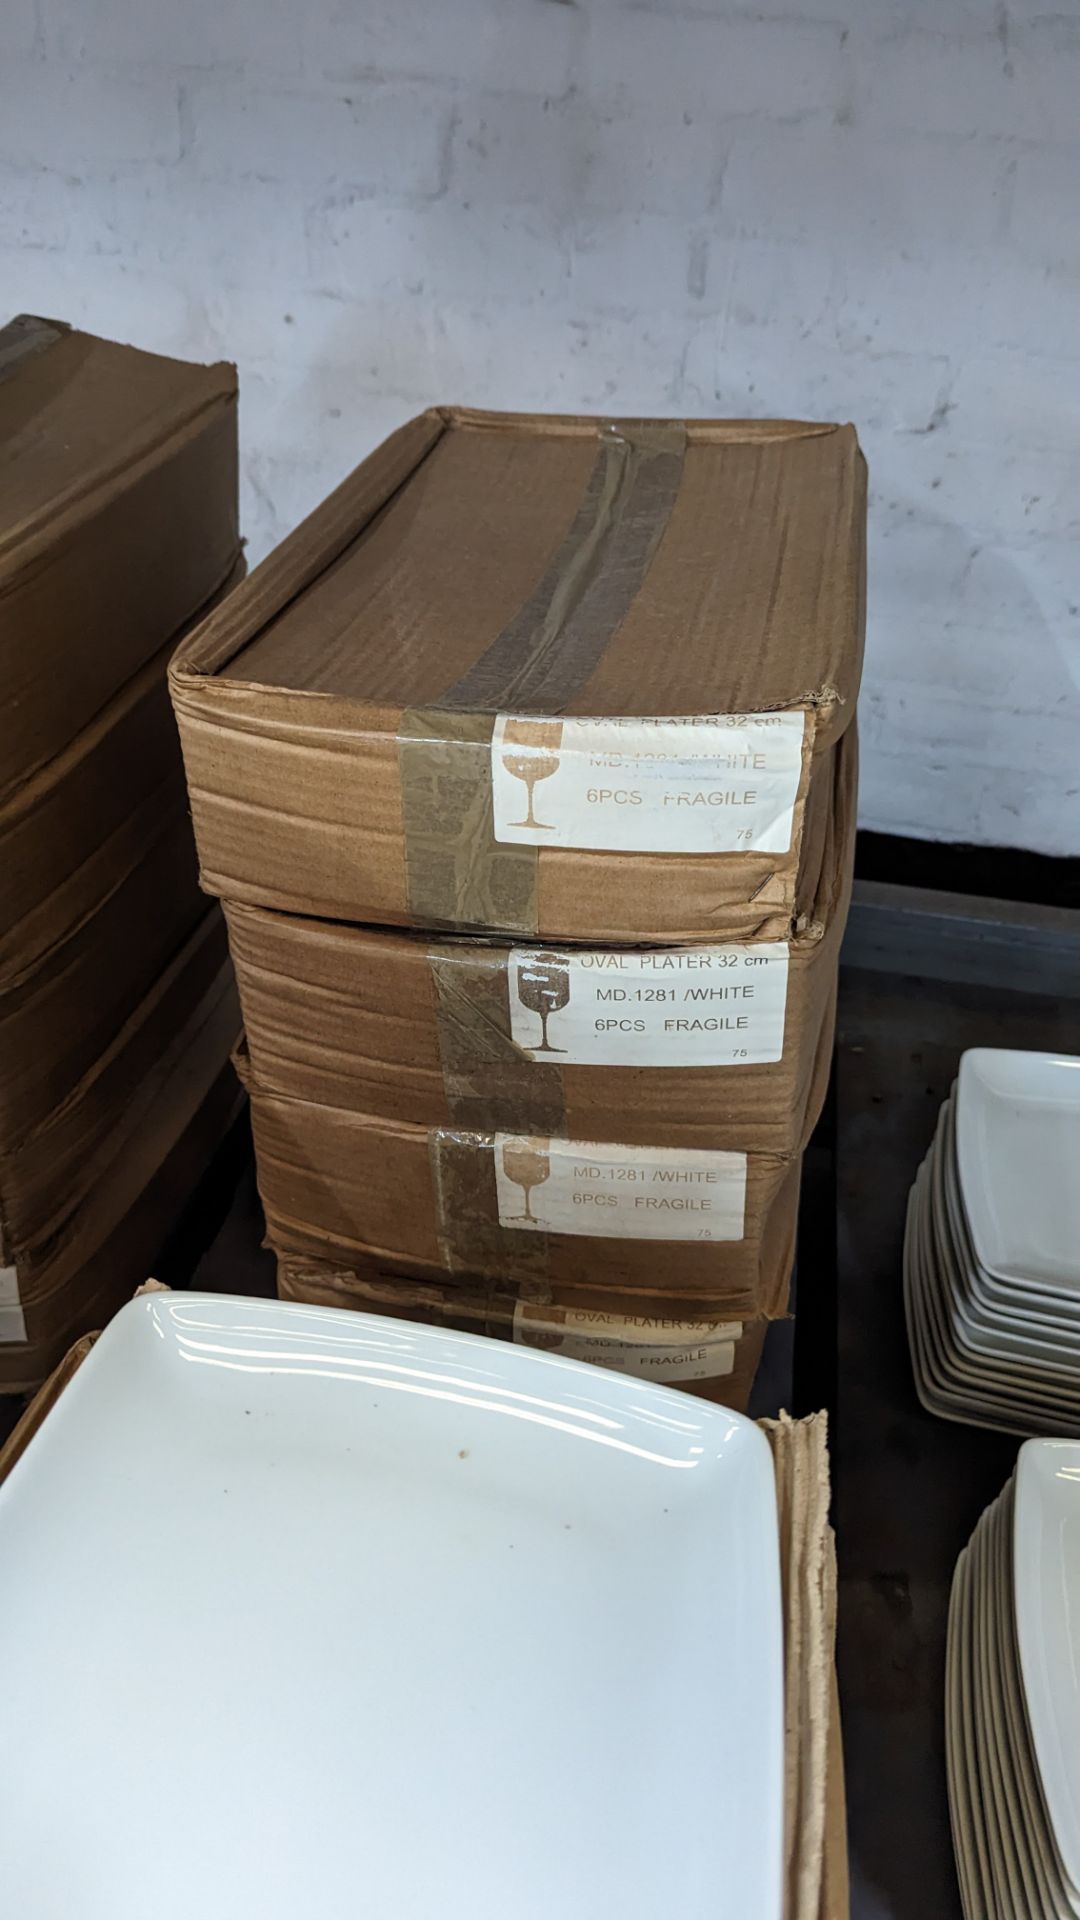 52 off white rectangular plates/small platters each measuring approximately 325mm x 210mm - in 2 sta - Image 4 of 4